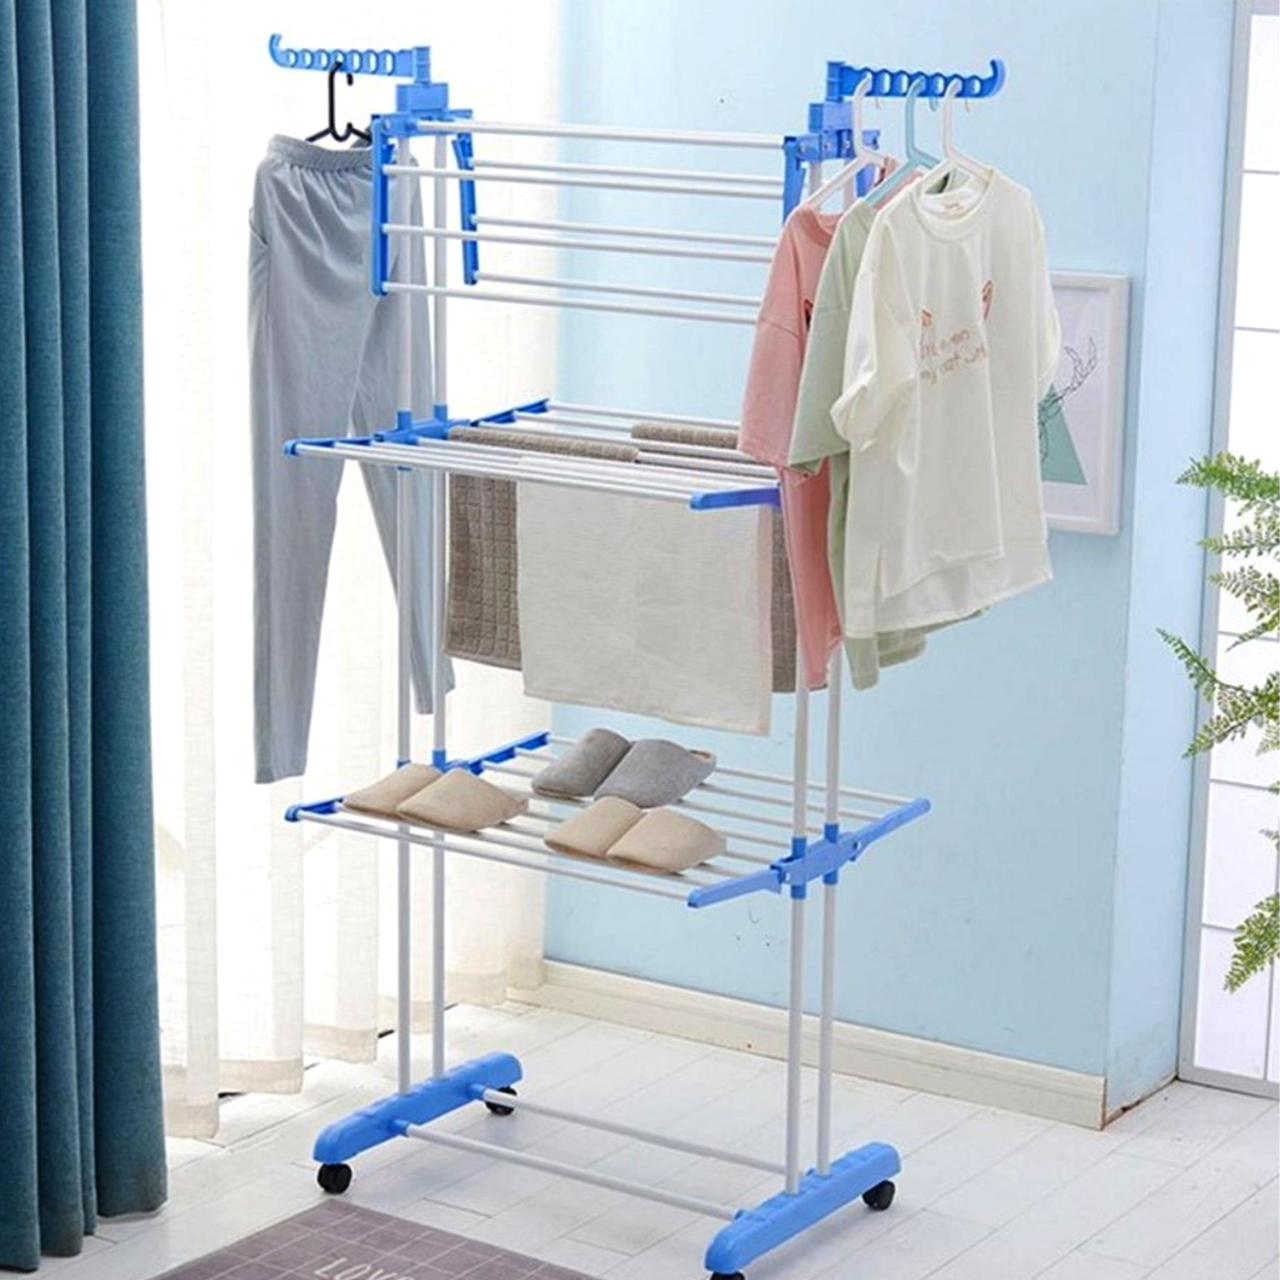 3-Tier Cloth Drying Rack Blue/White